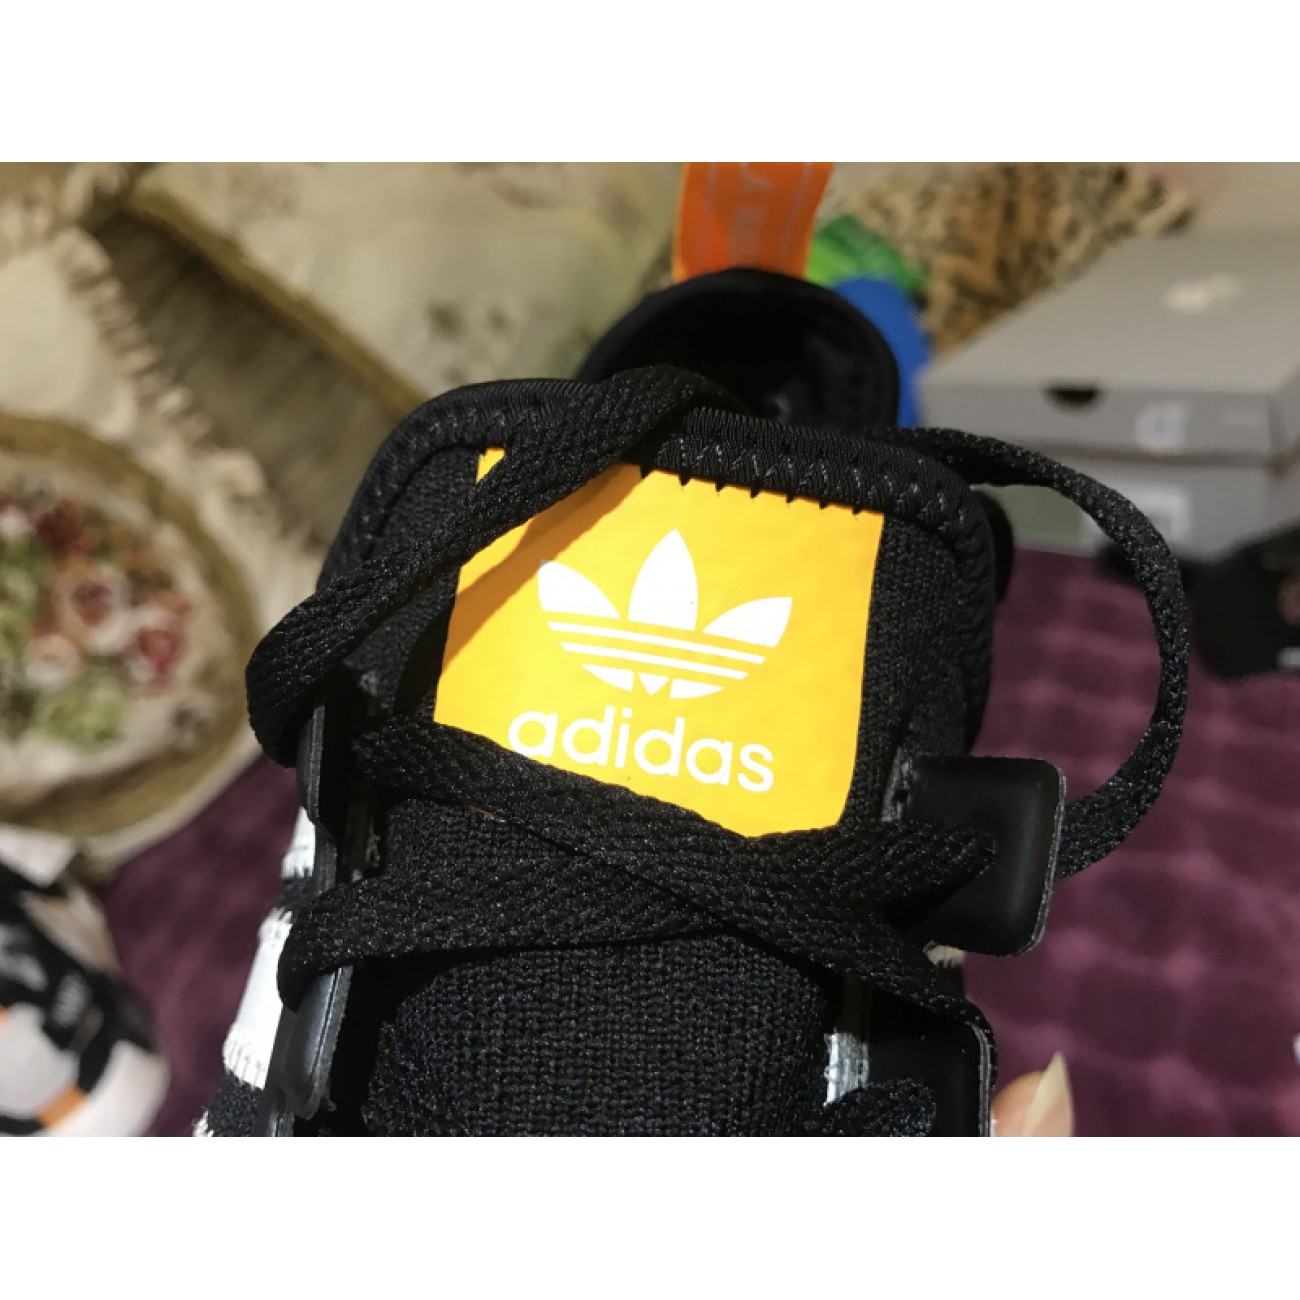 Off-White x Adidas NMD R1 OWNMD BA8860